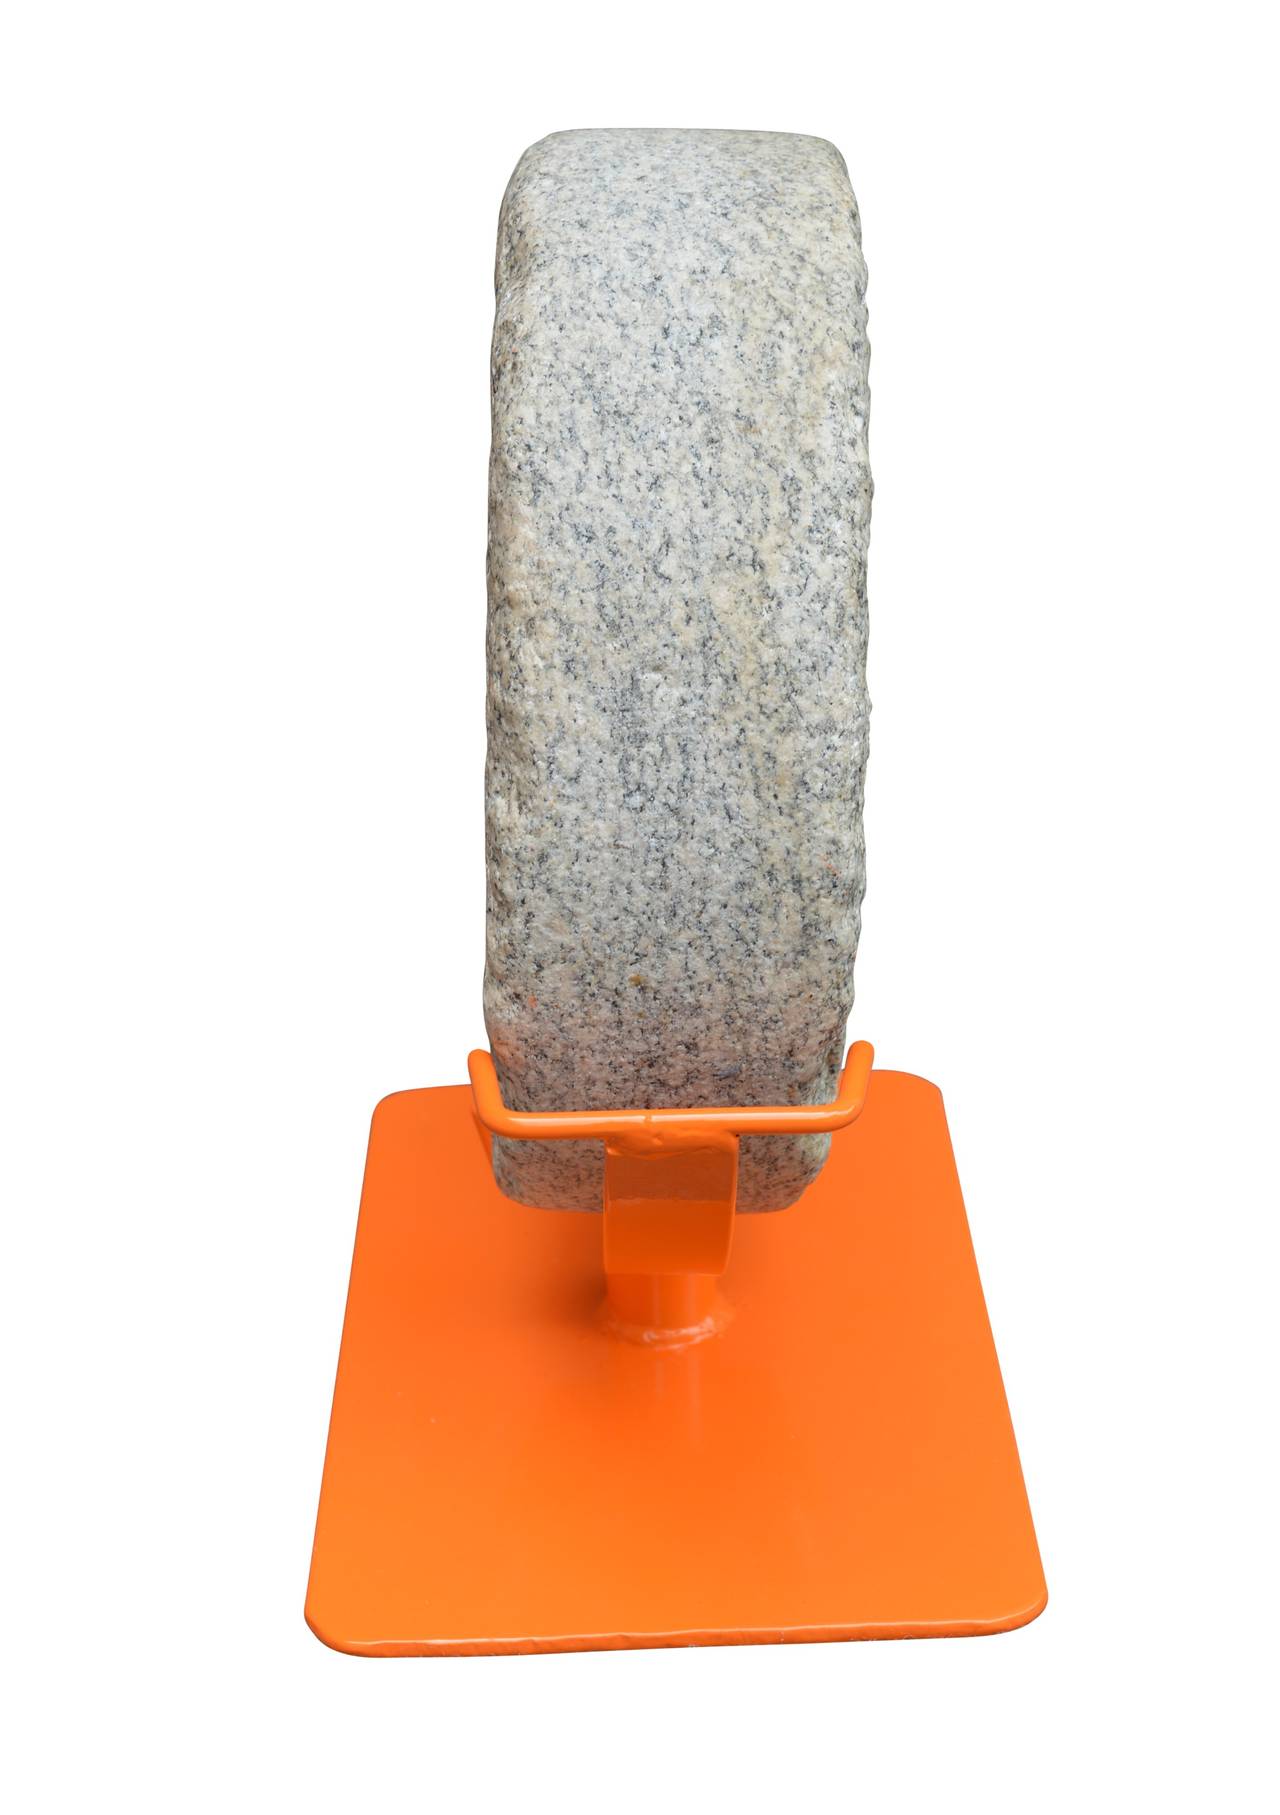 American Late 19th Century Mill-Stone on Orange Stand